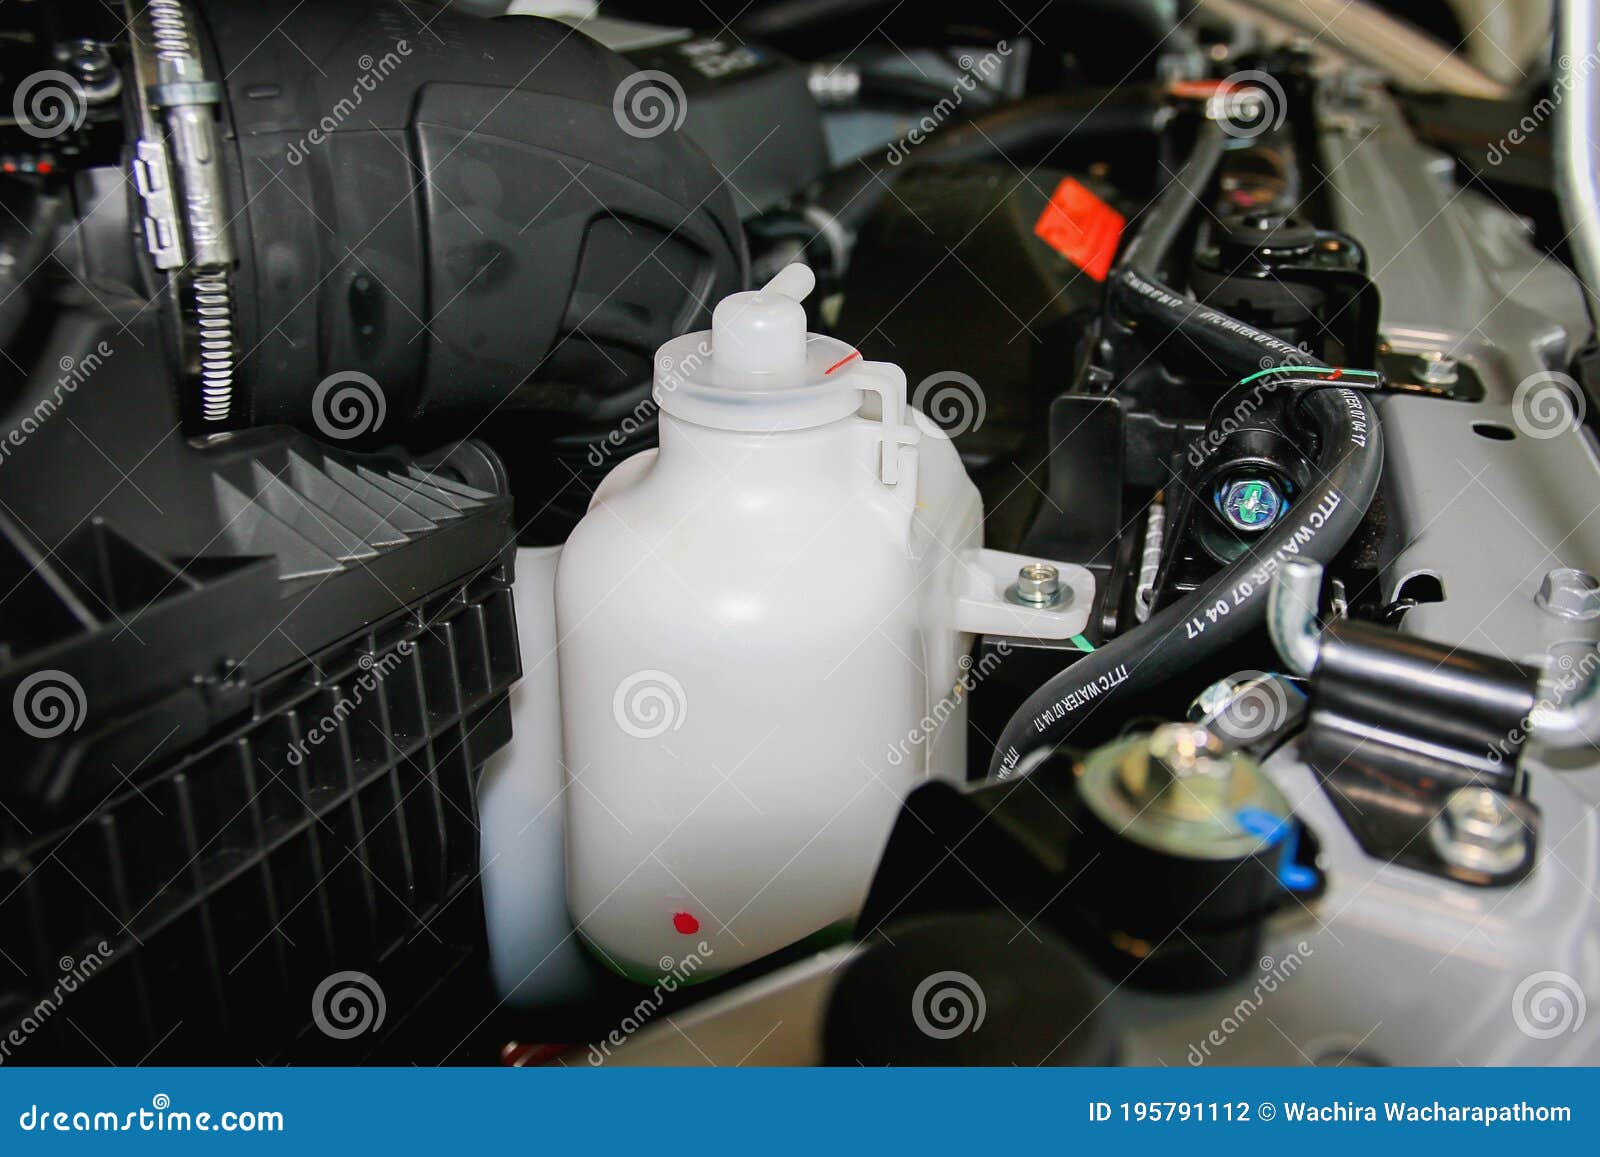 Car Coolant Tank is Cooling System To Remove Heat Editorial Photography -  Image of hood, motor: 195791112